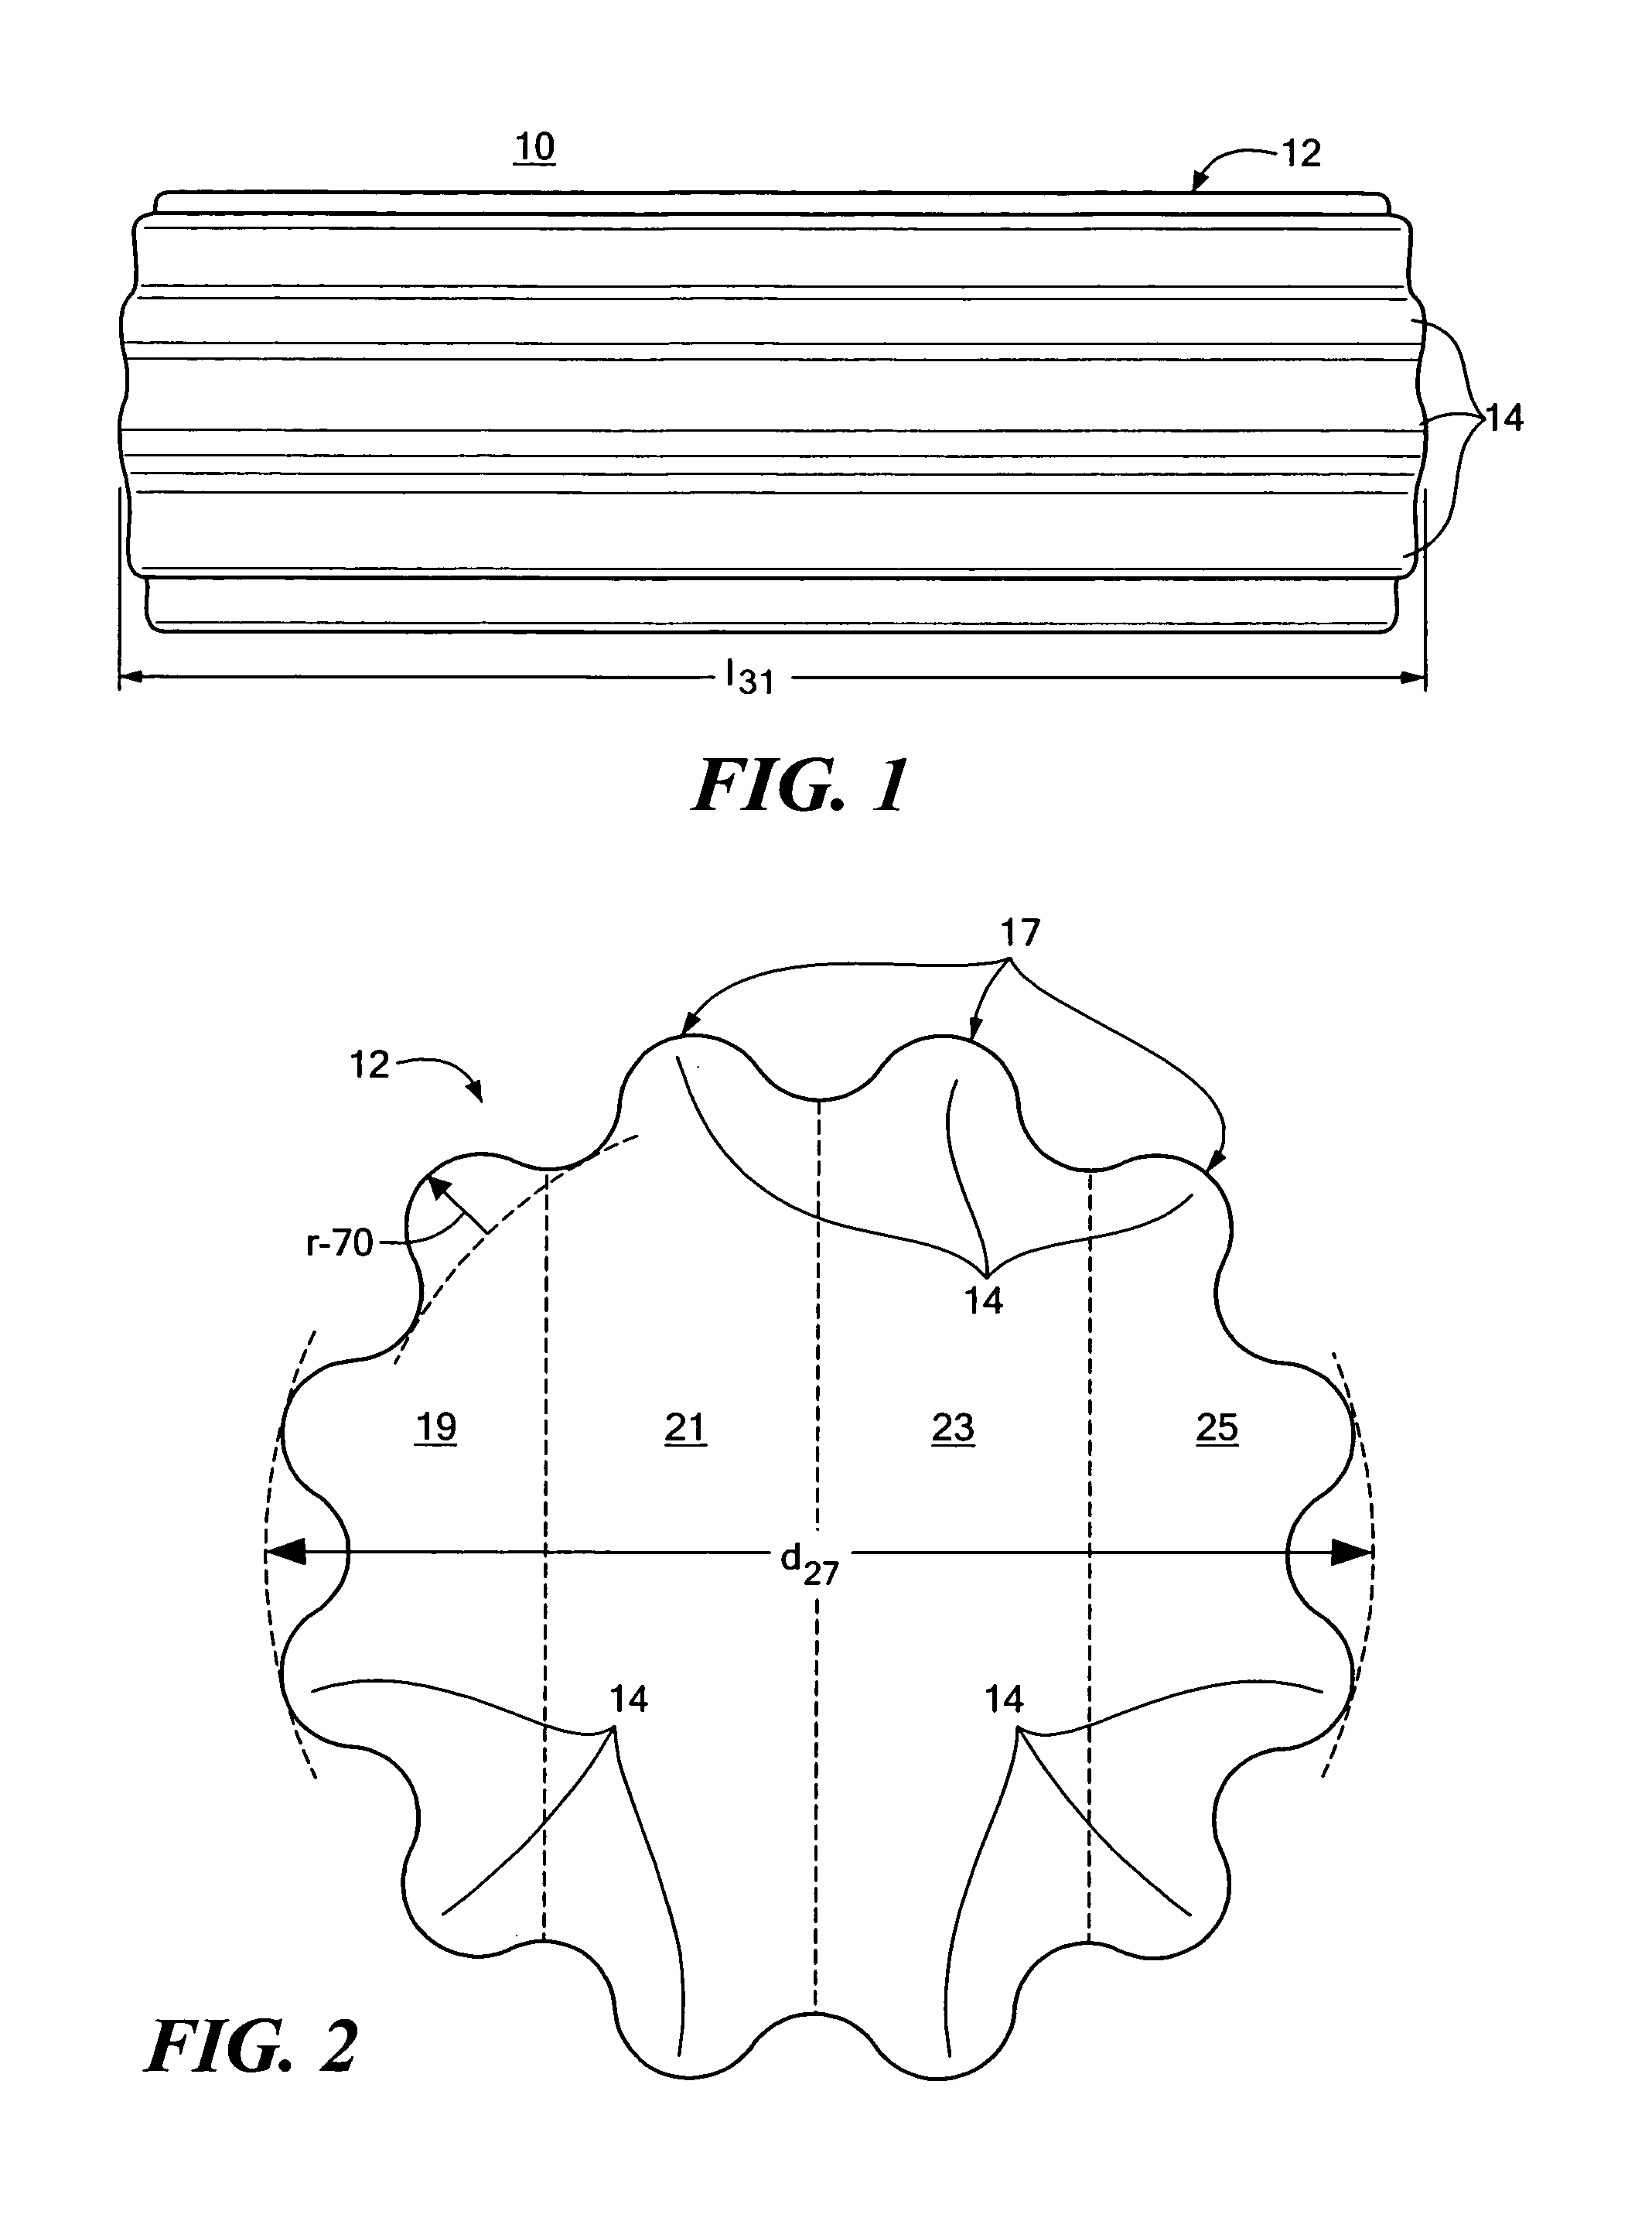 Therapeutic, fitness, and sports enhancement device